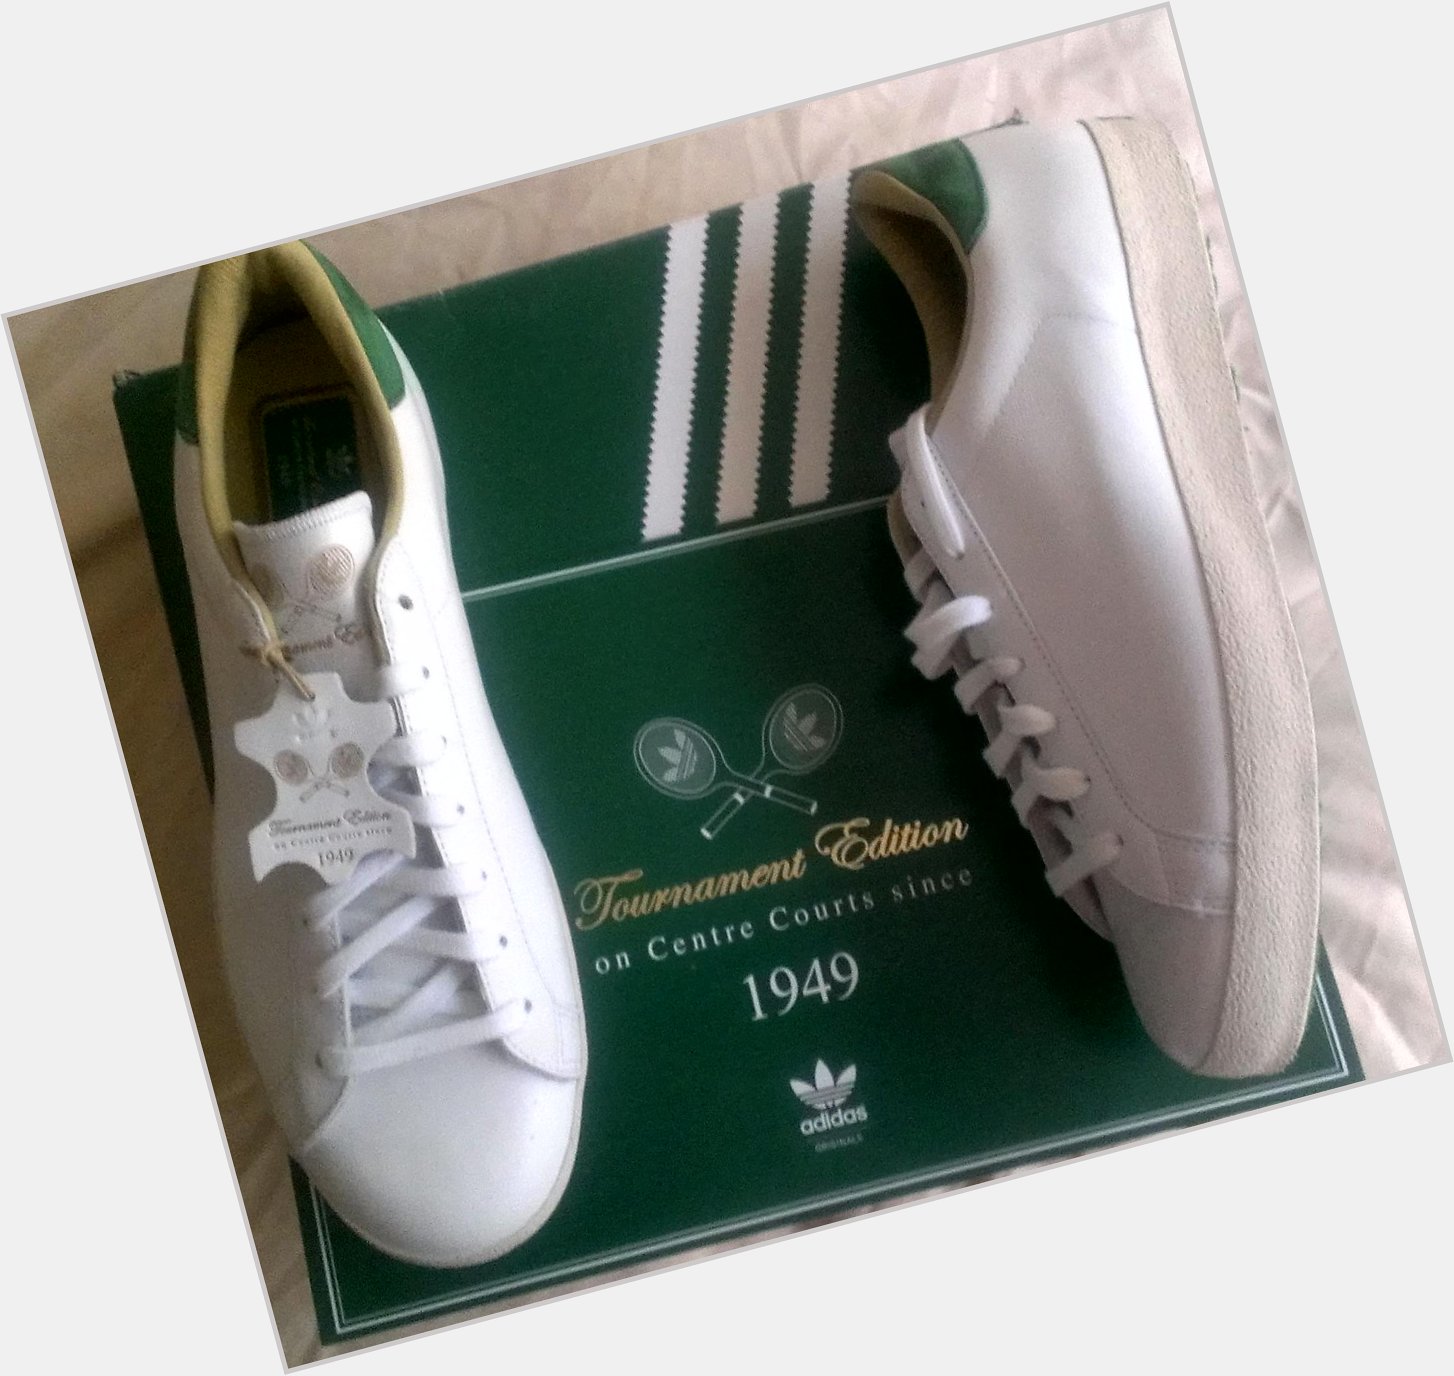 Must wish Adidas aficionado Rod Laver a happy 77th birthday. I hope he got a new pair of these... 